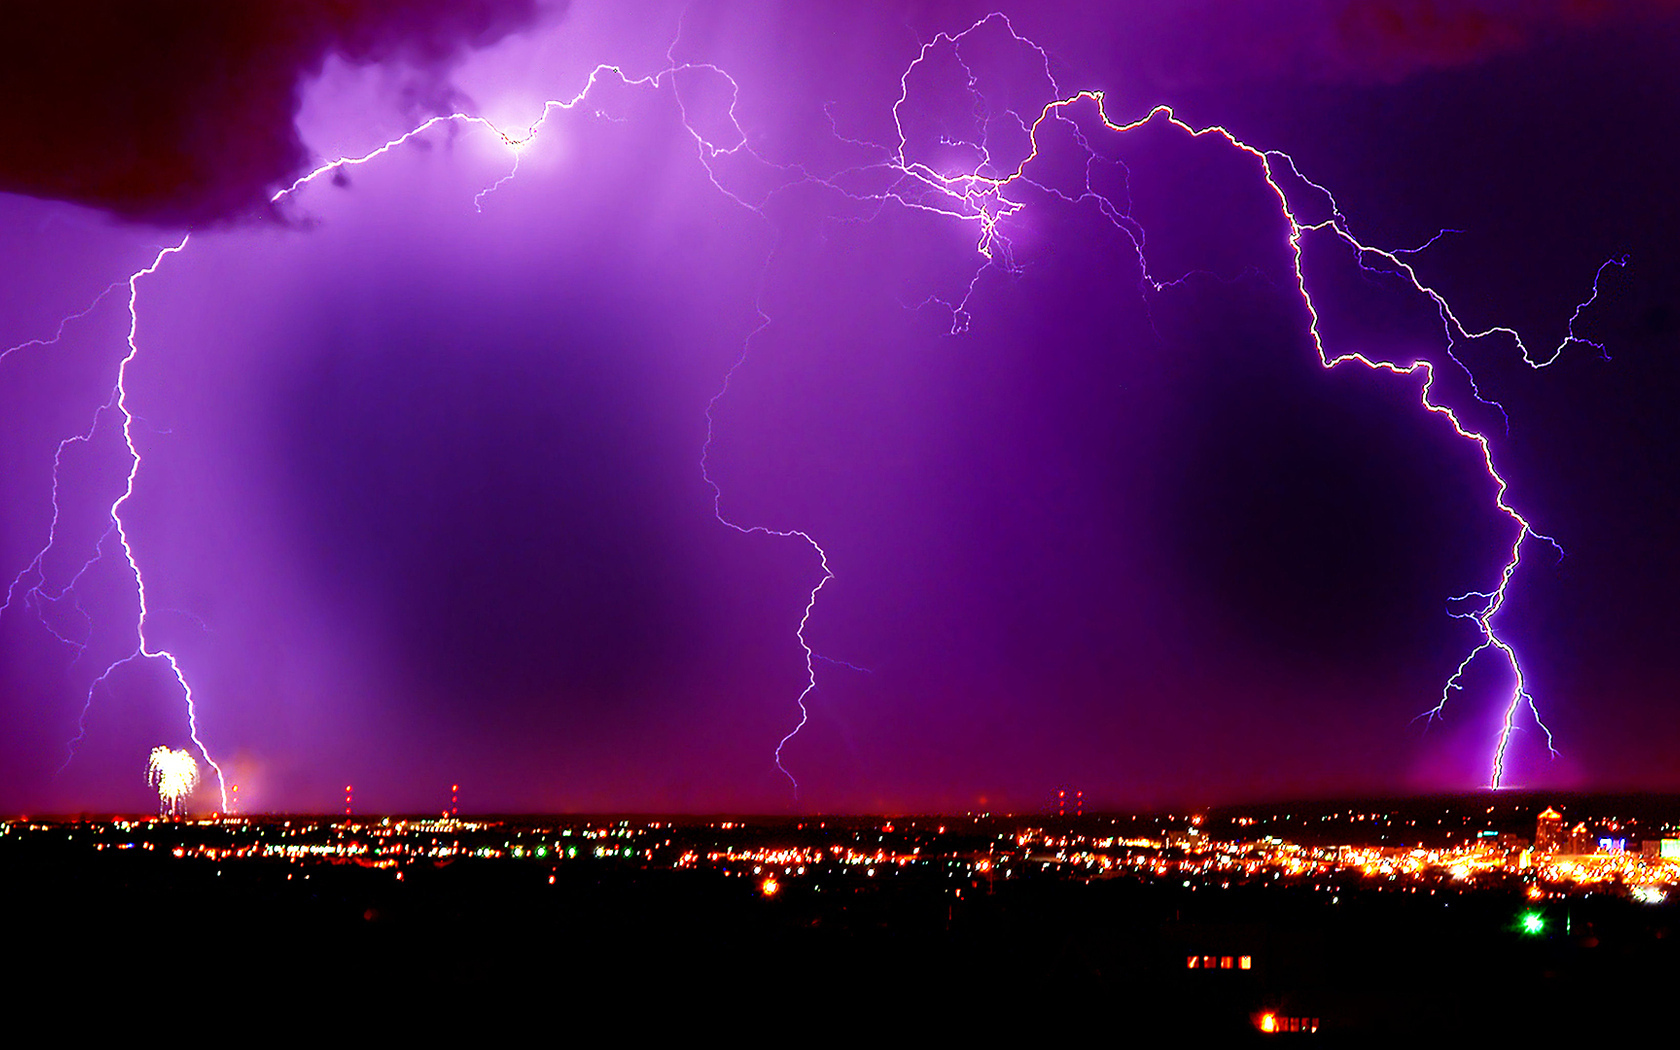 Cool Backgrounds Of Lightning Images amp Pictures   Becuo